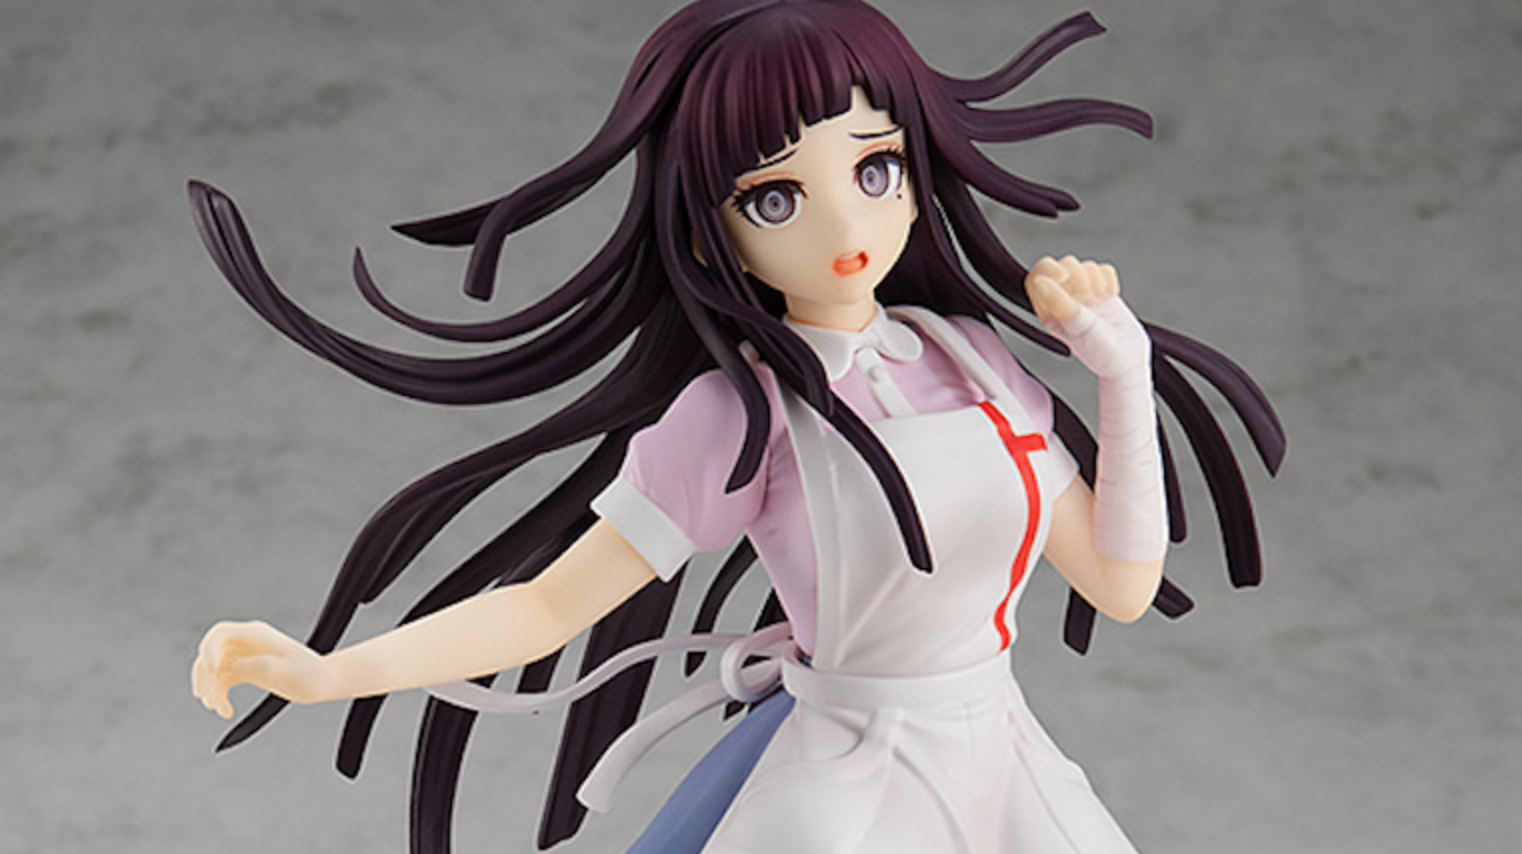 The Danganronpa 2 Mikan Tsumiki Figure Doesn't Look Too Clumsy